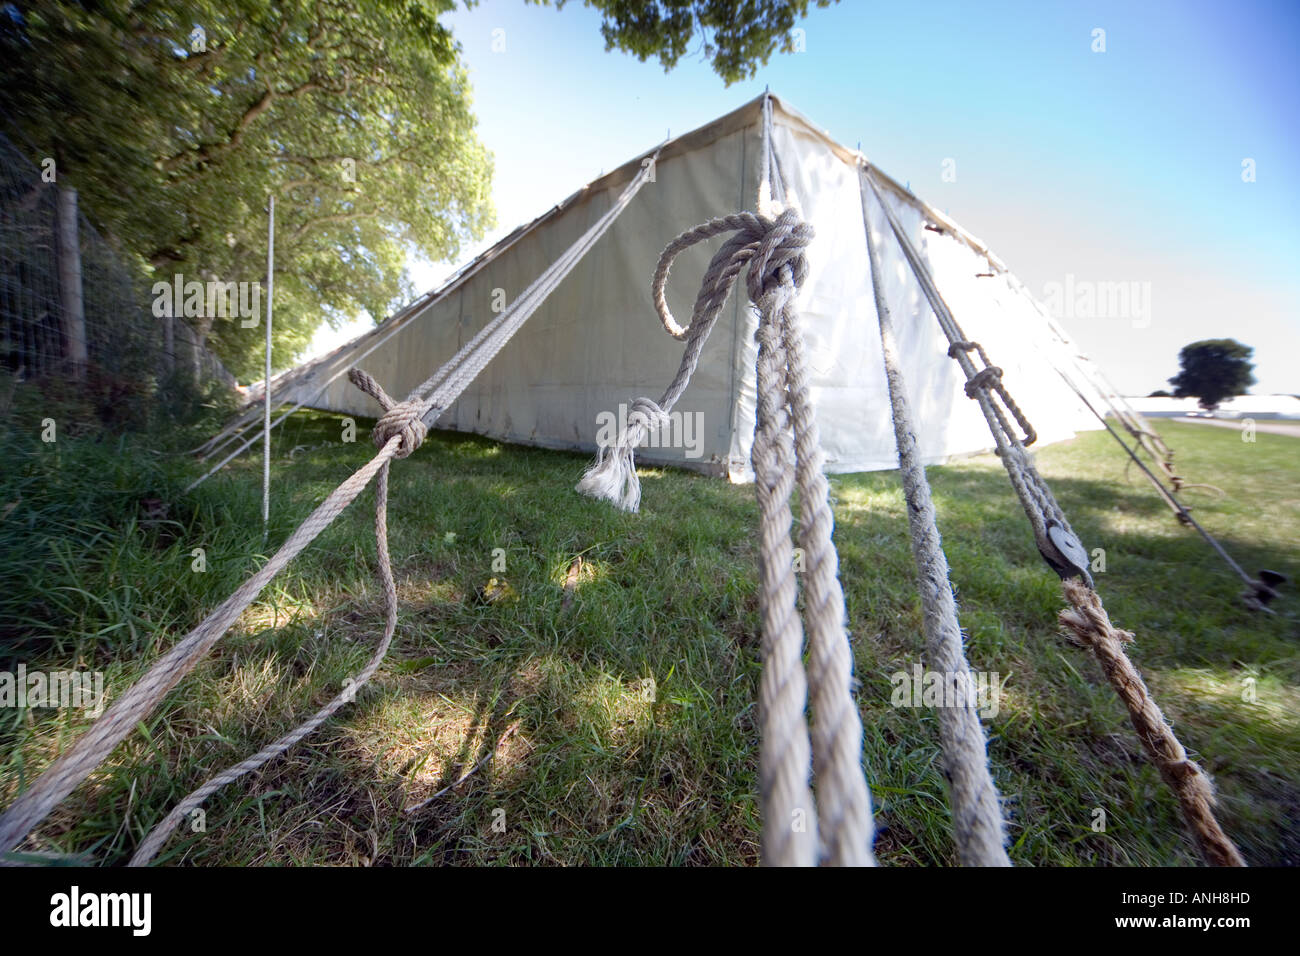 https://c8.alamy.com/comp/ANH8HD/tent-marquee-guy-ropes-ANH8HD.jpg